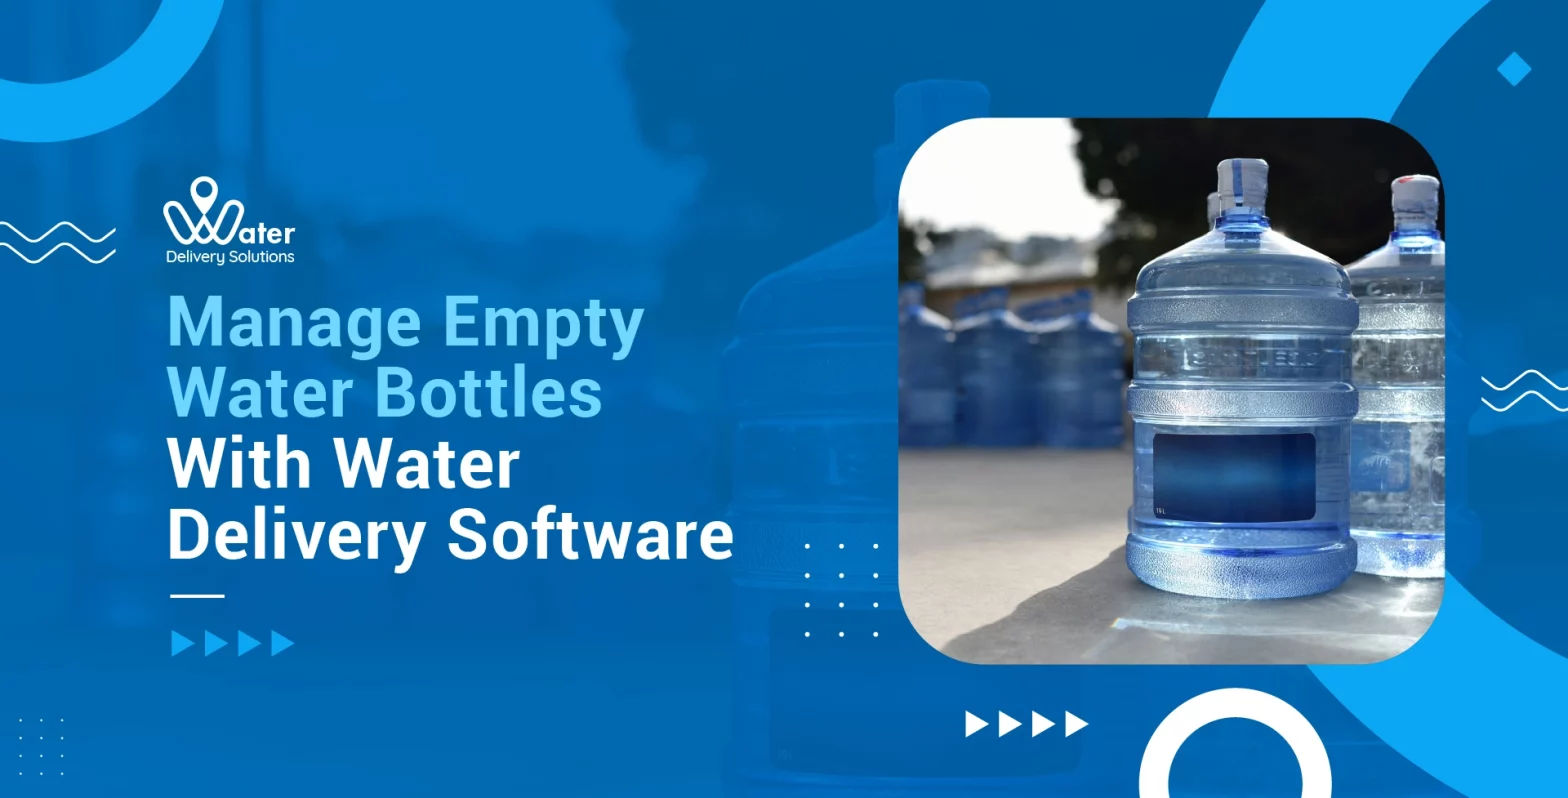 wds-founded-by-ravi-garg-website-insights-manage-empty-water-bottles-with-water-delivery-software